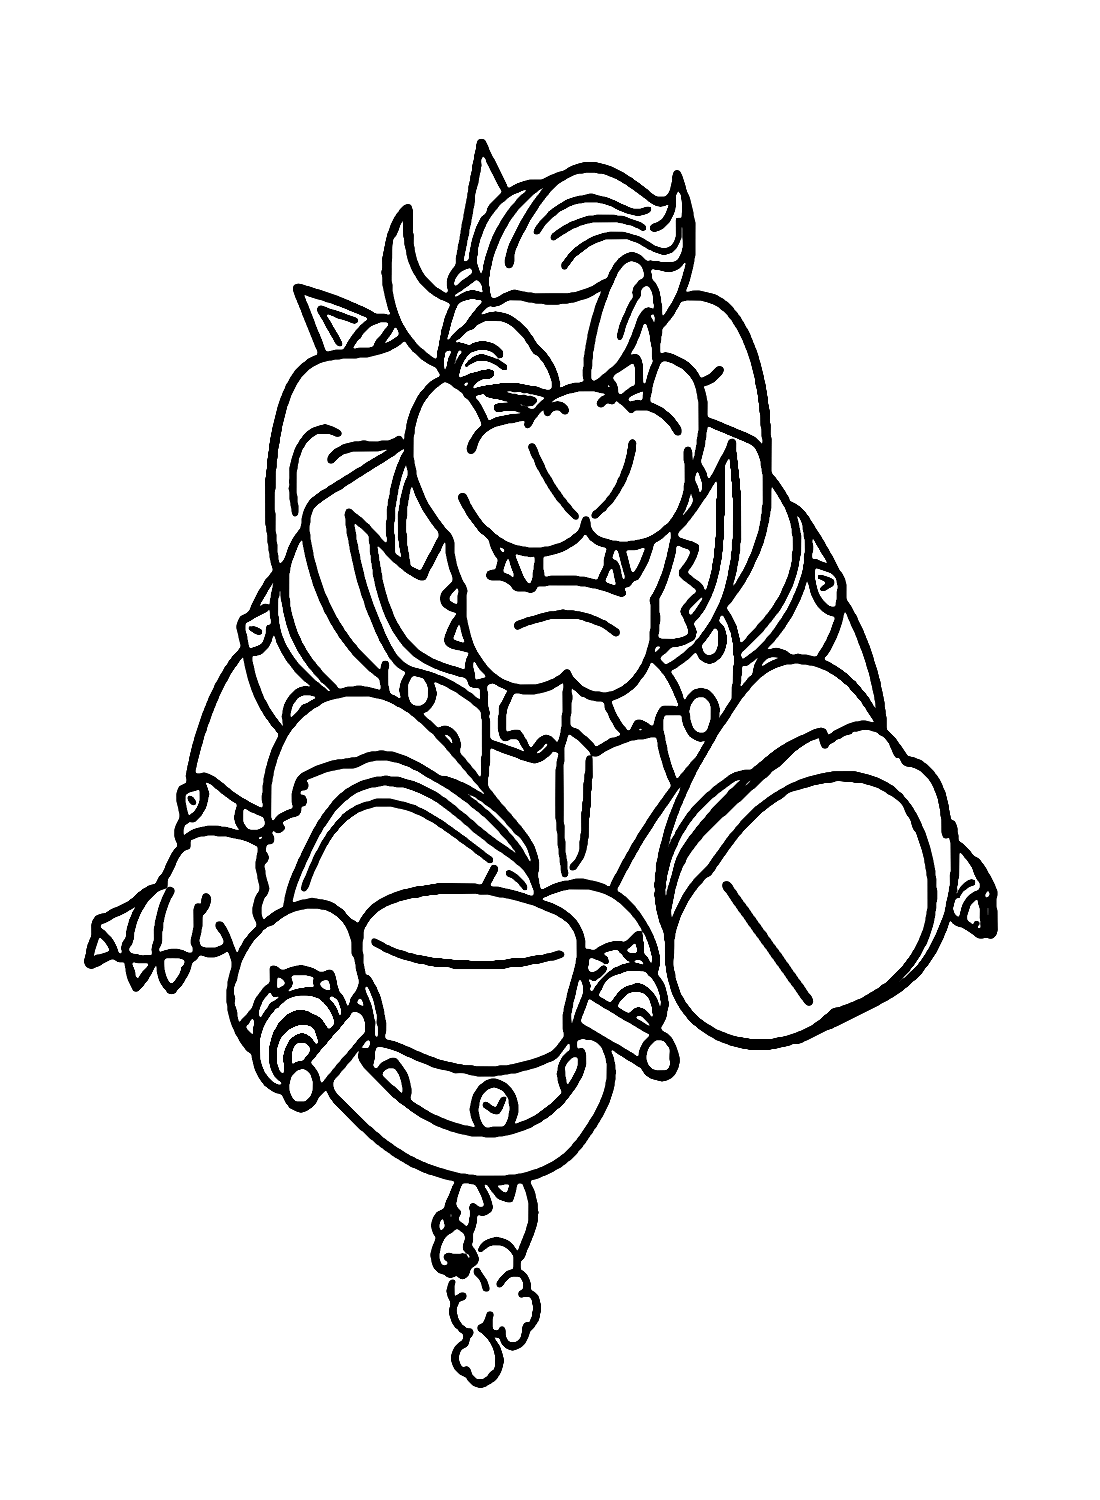 Bowser from Super Mario Odyssey Coloring Page